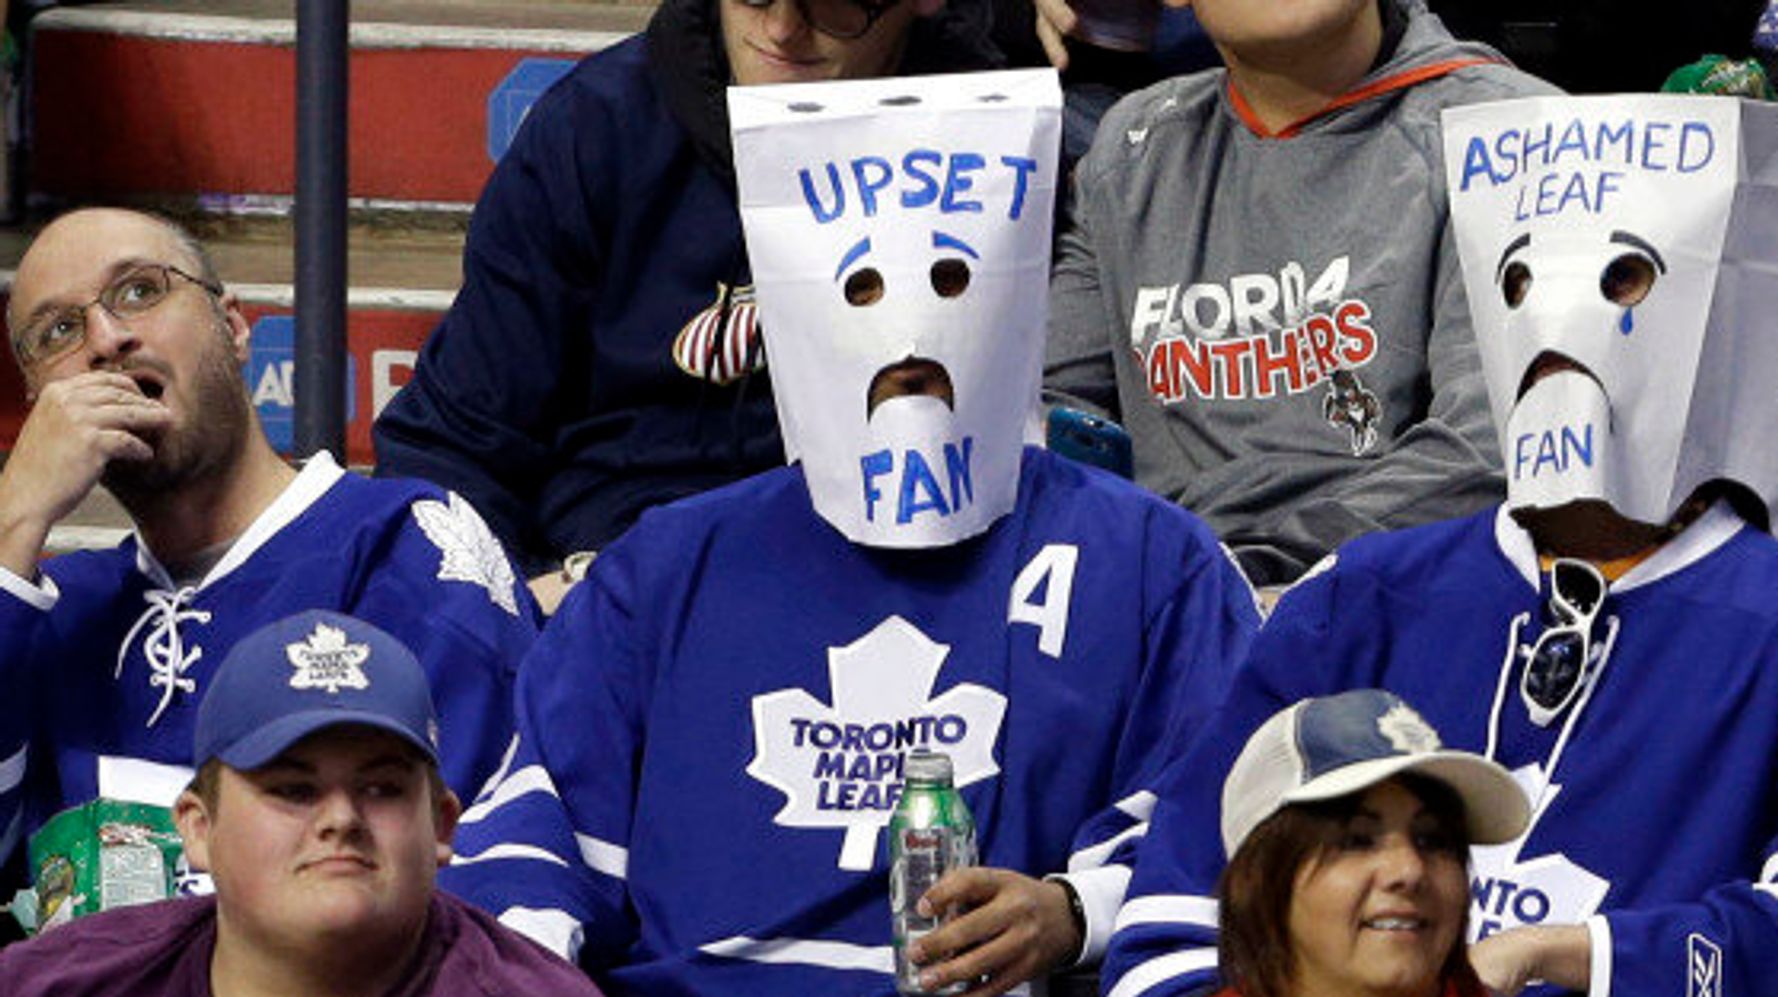 Toronto Maple Leafs jerseys to include ads and fans are outraged